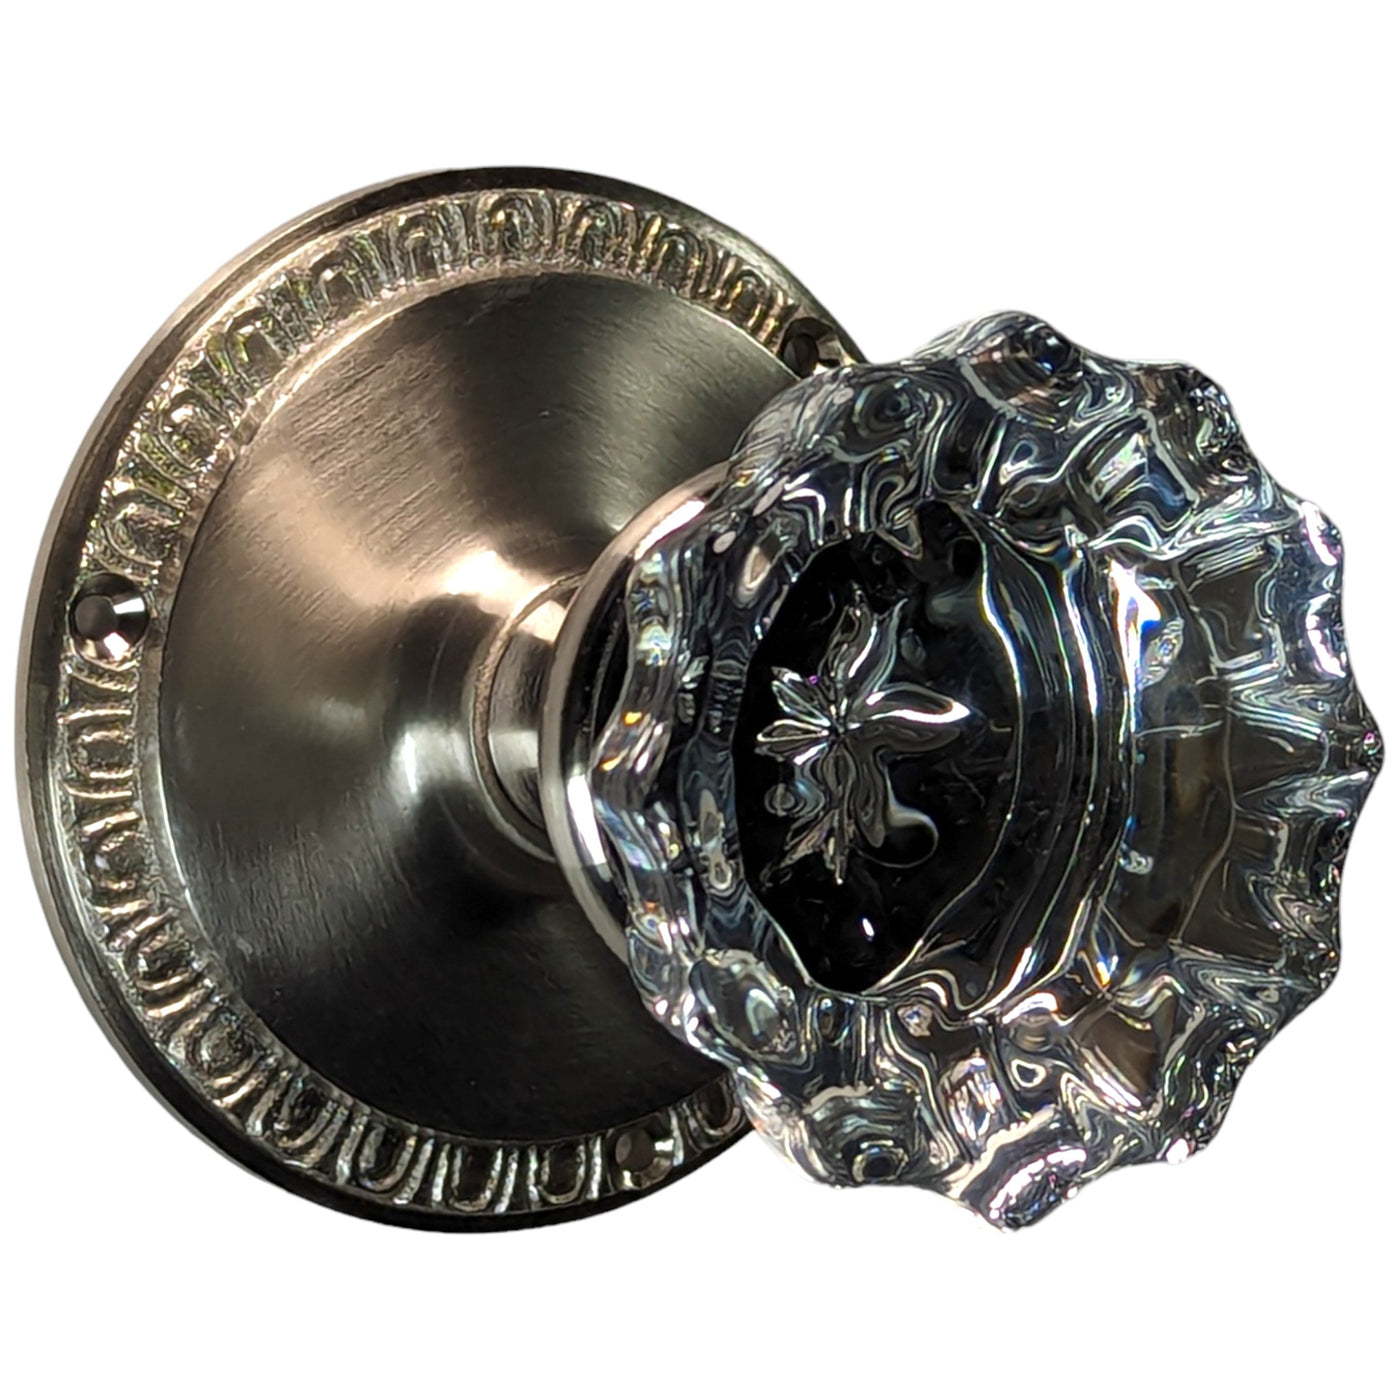 Glass Fluted Doorknob Set with Egg & Dart Rosette (Several Finishes Available)